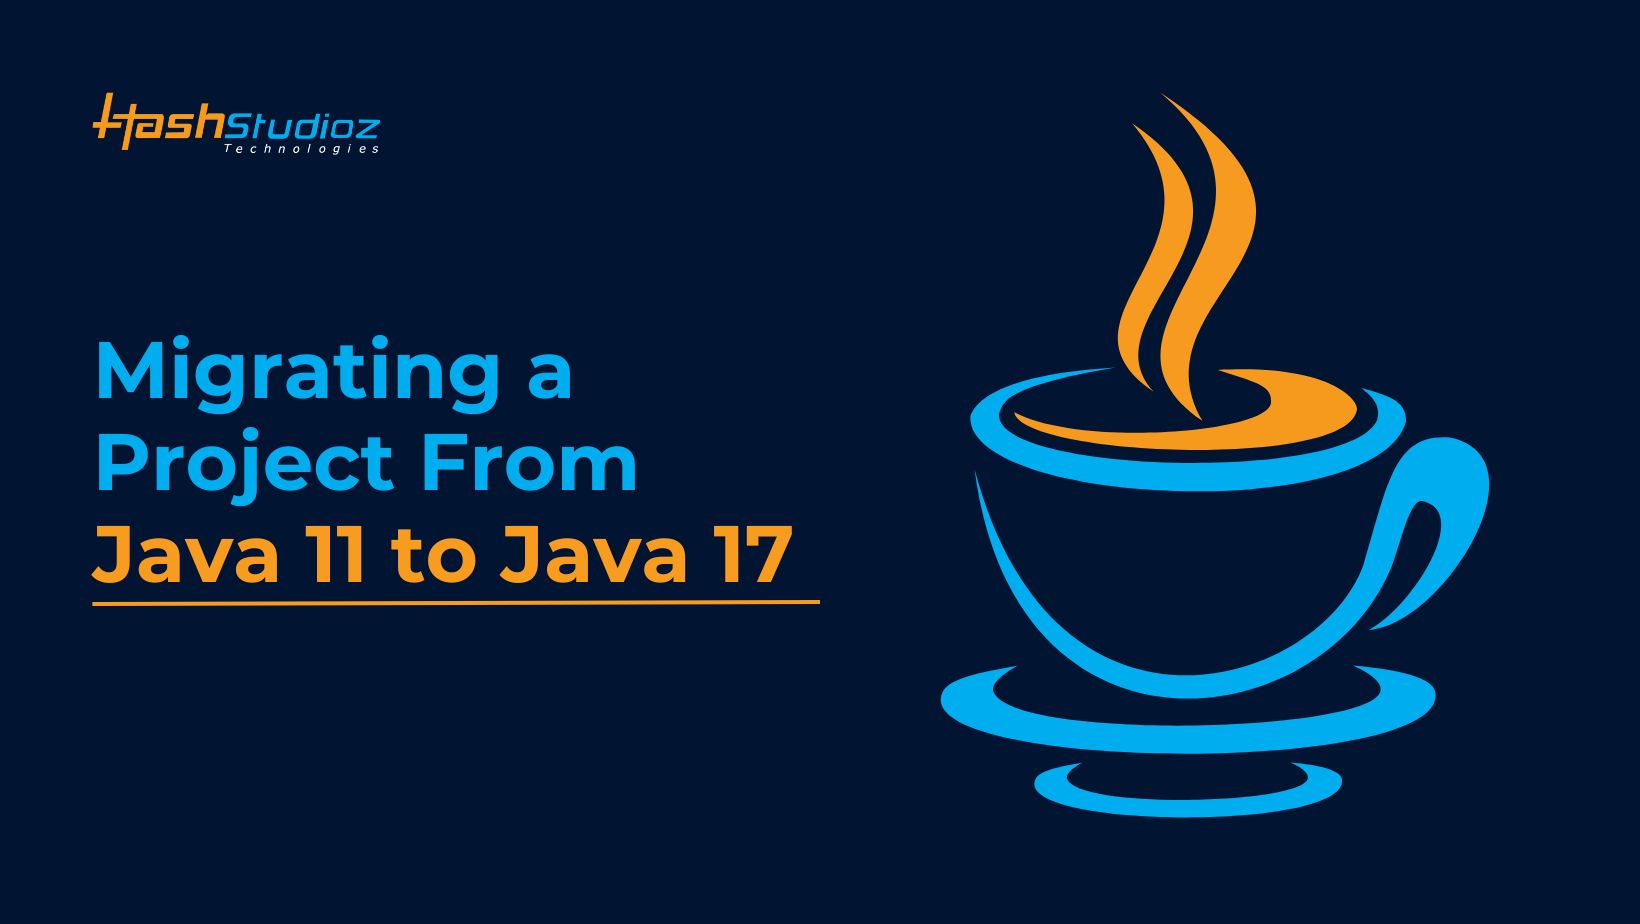 Java Project Migration: Step-by-Step Guide from Java 11 to 17